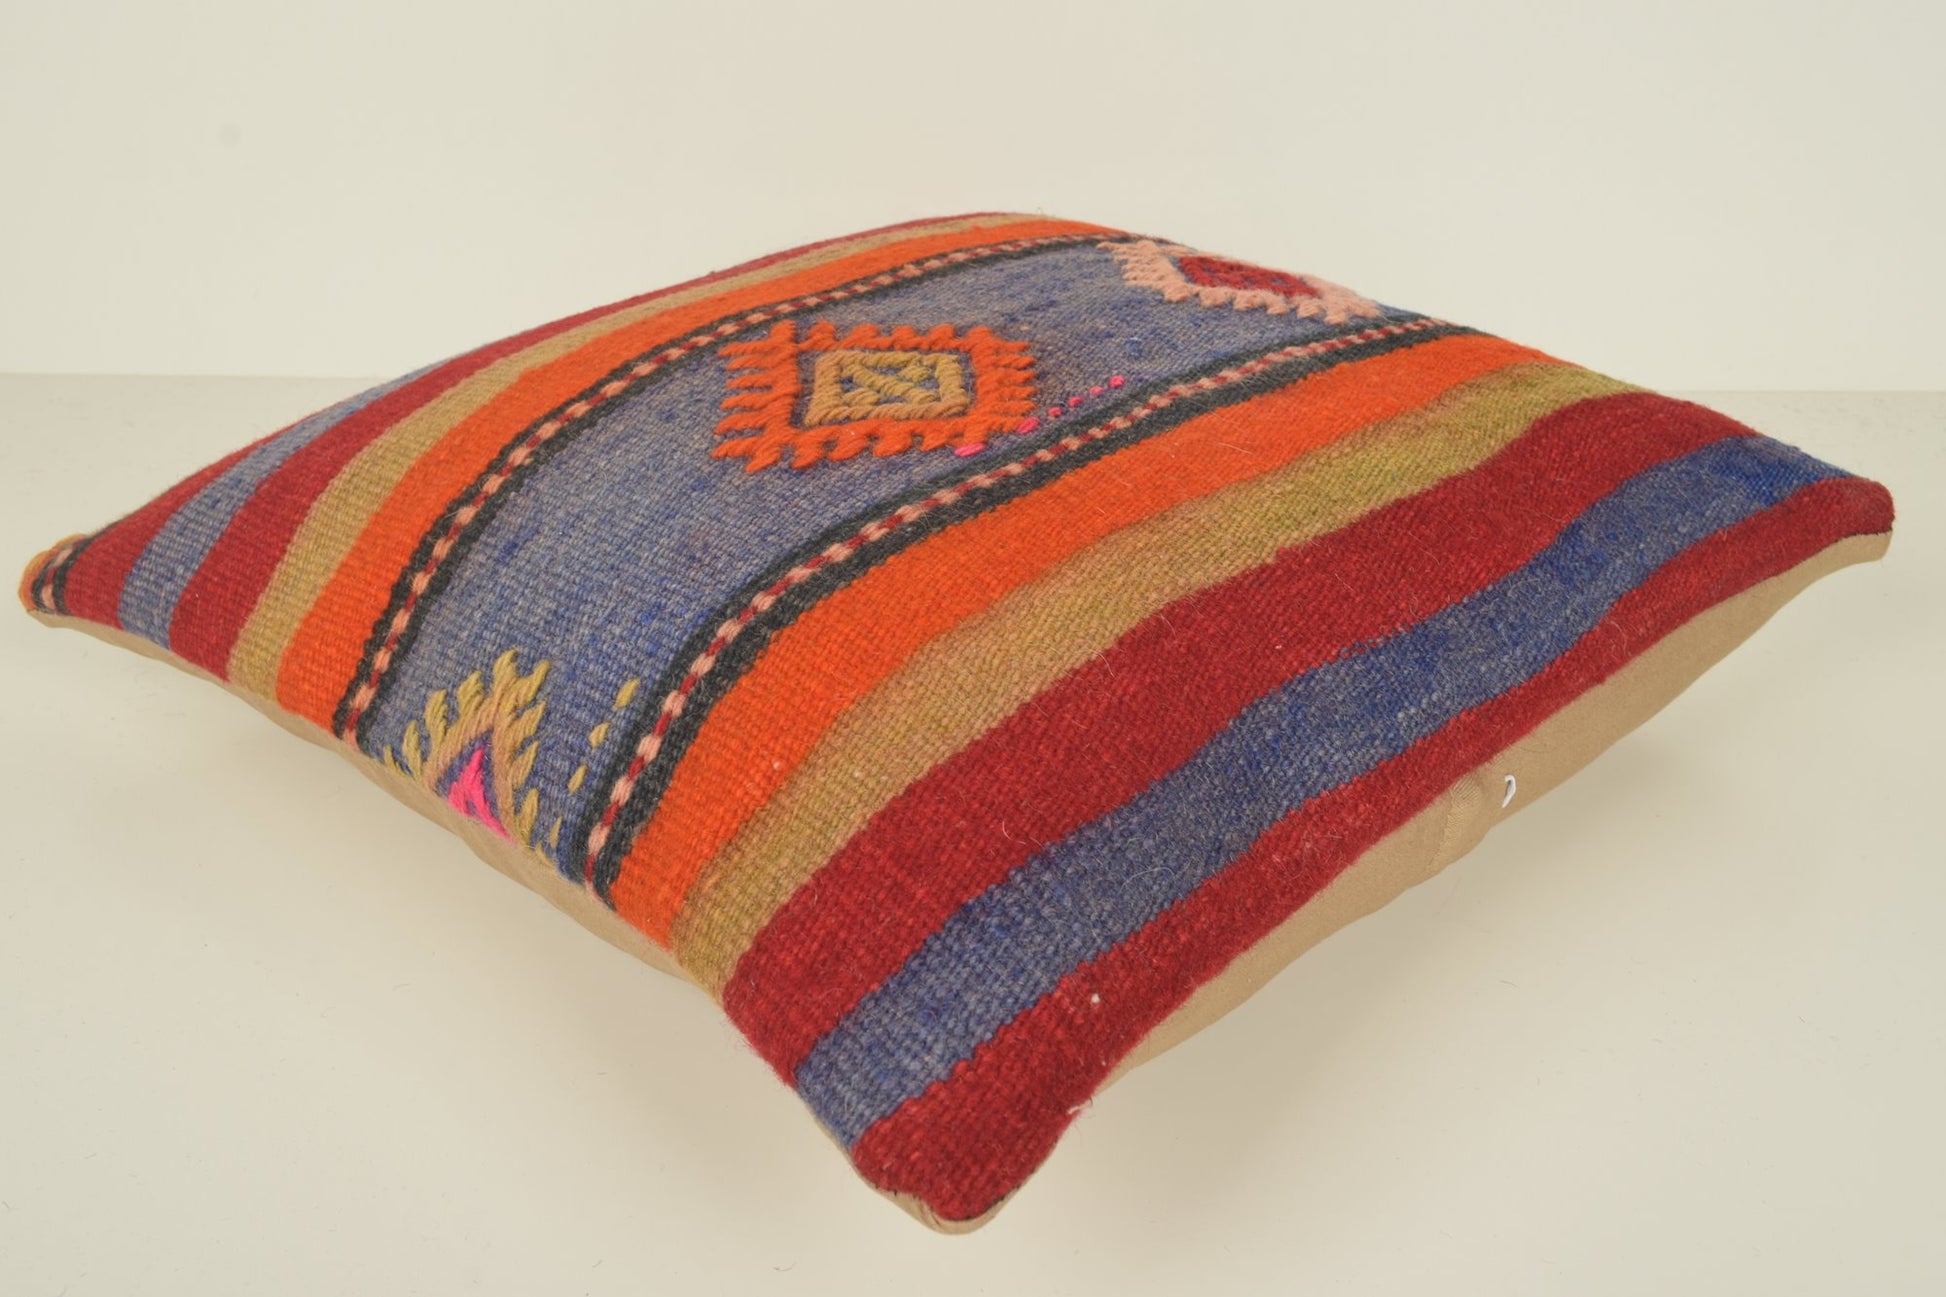 Kilim Floor Pillow Pouf C01394 18x18 Shabby chic African Large